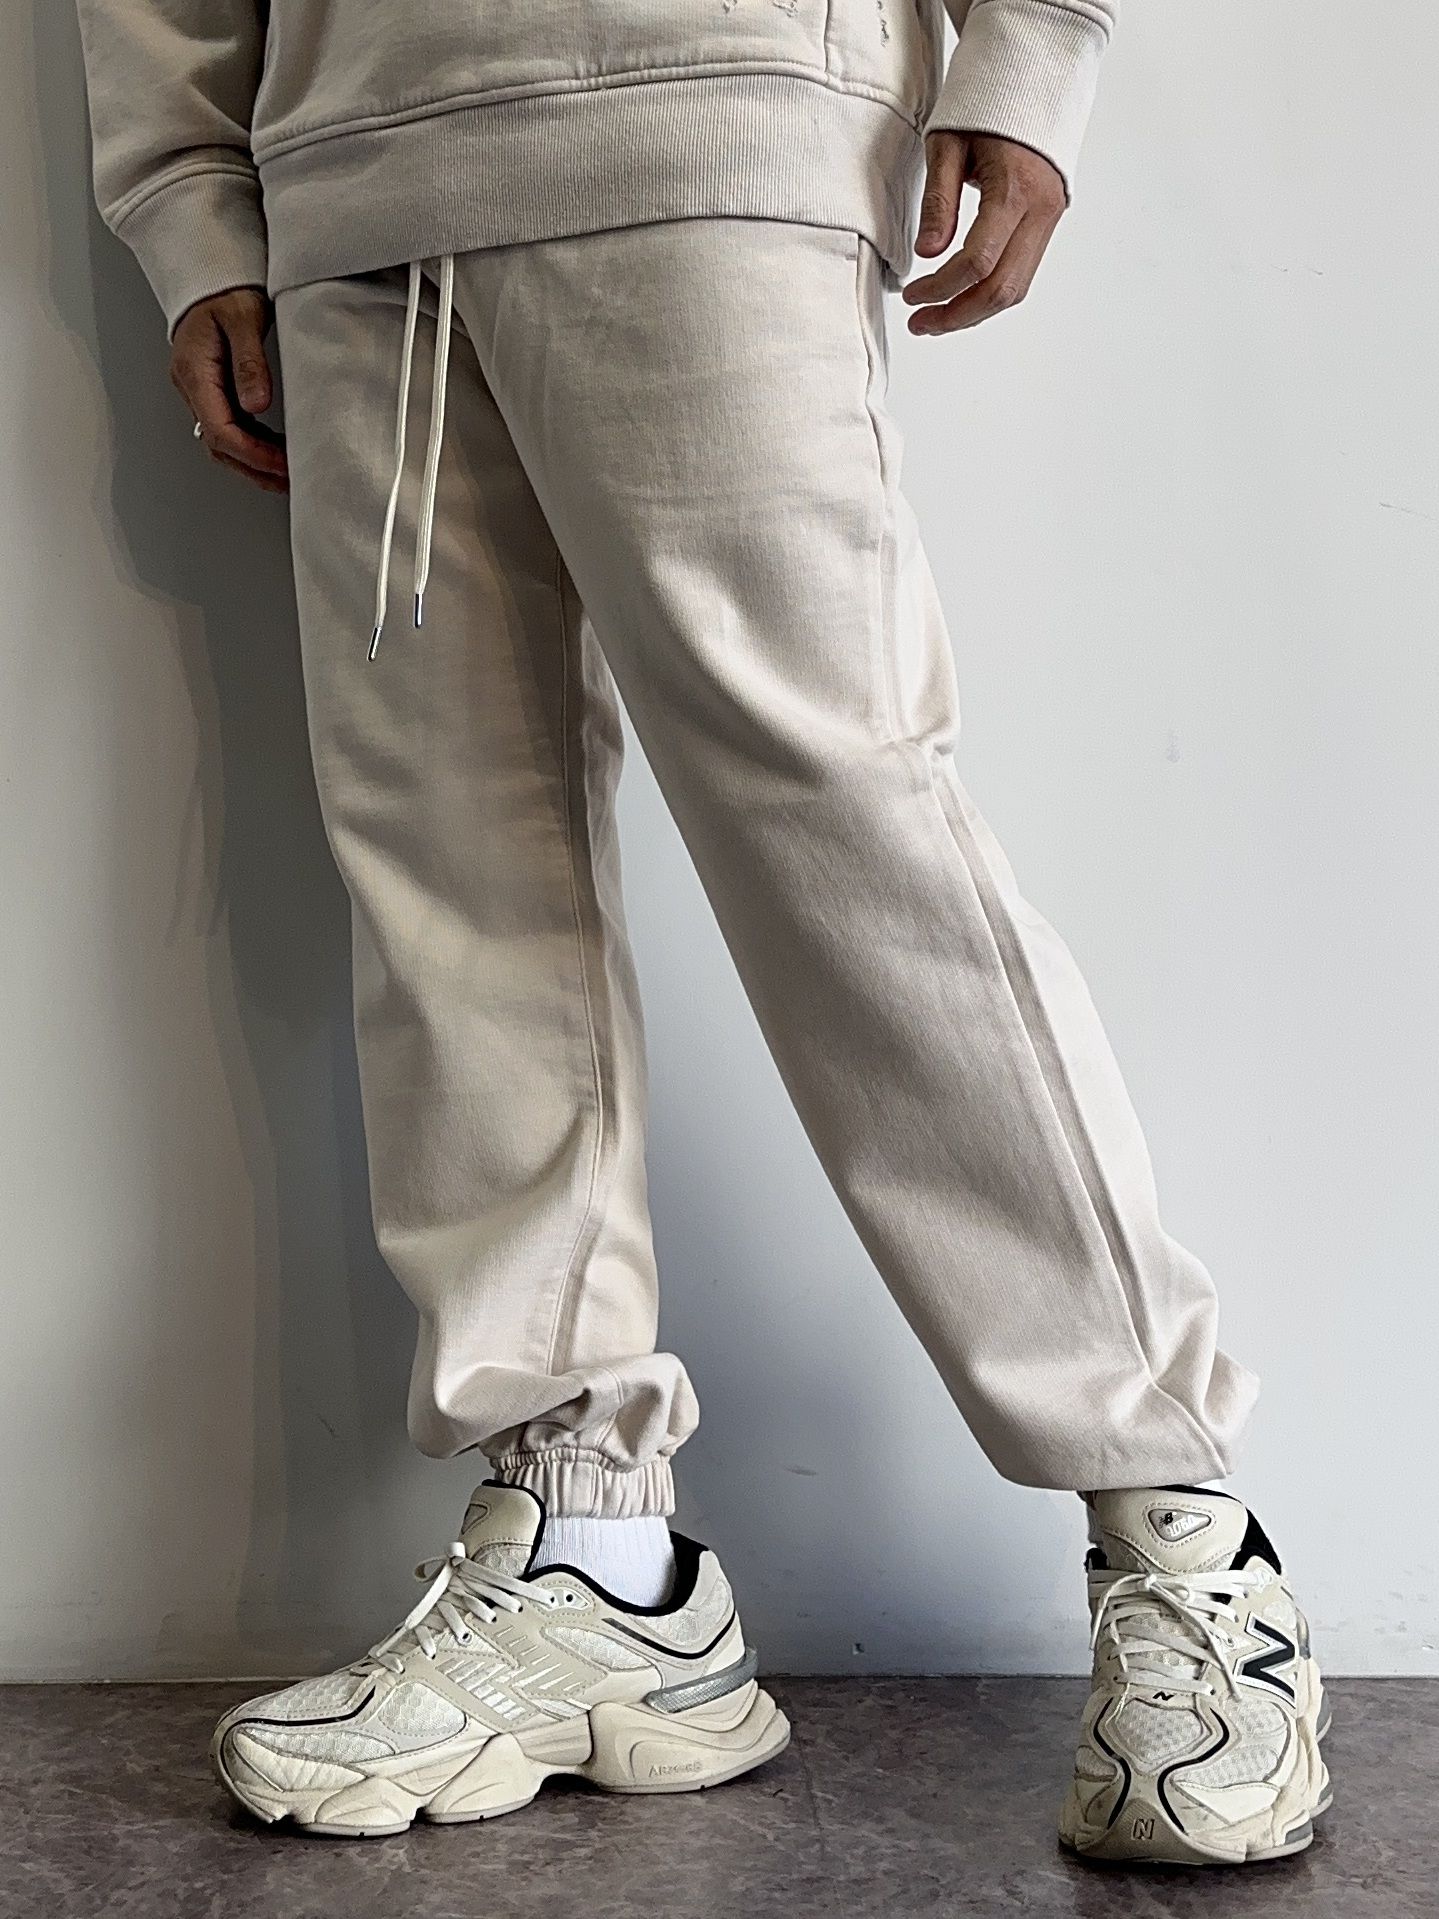 RESOUND CLOTHING - MIKE SWEAT PANTS / RC31-ST-028 / 裾ゴムイージー